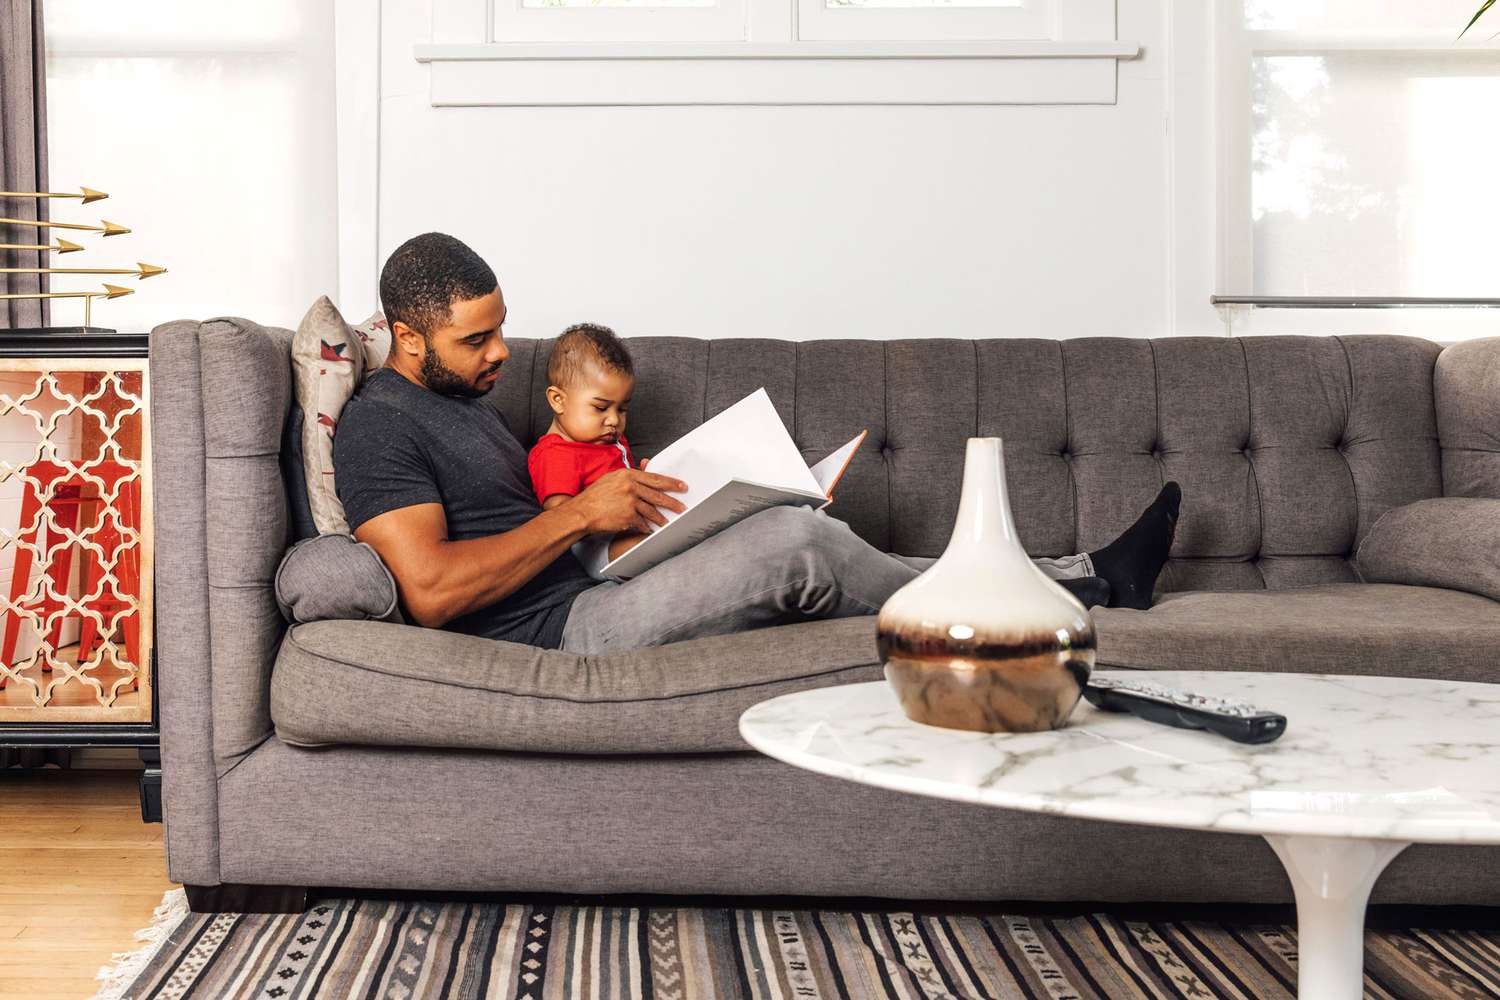 African American father reading to his baby on couch